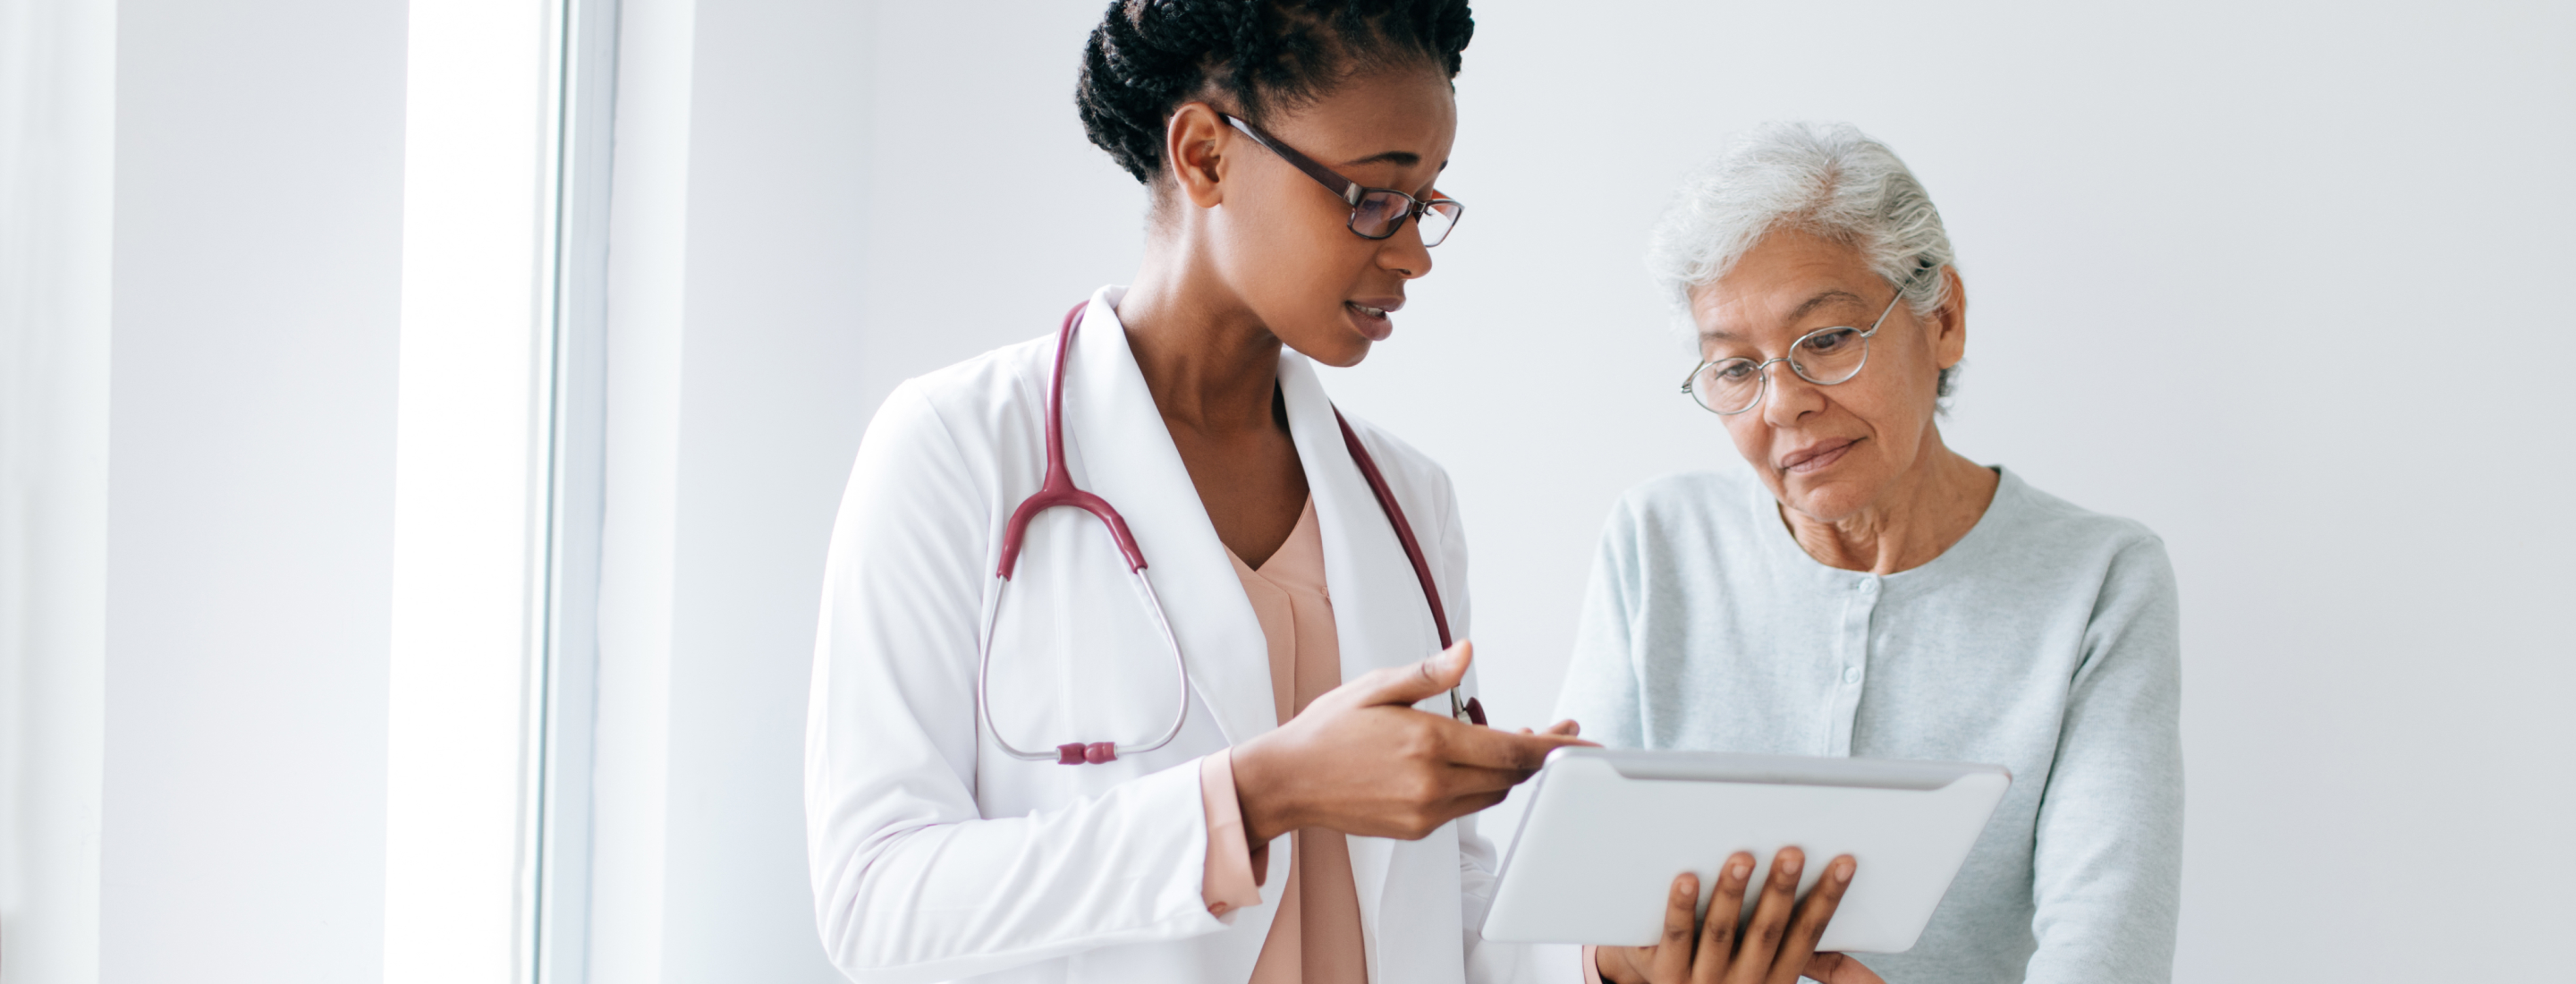 Primary Care Provider sharing results of a digital cognitive function test featuring a clock drawing test with their patient